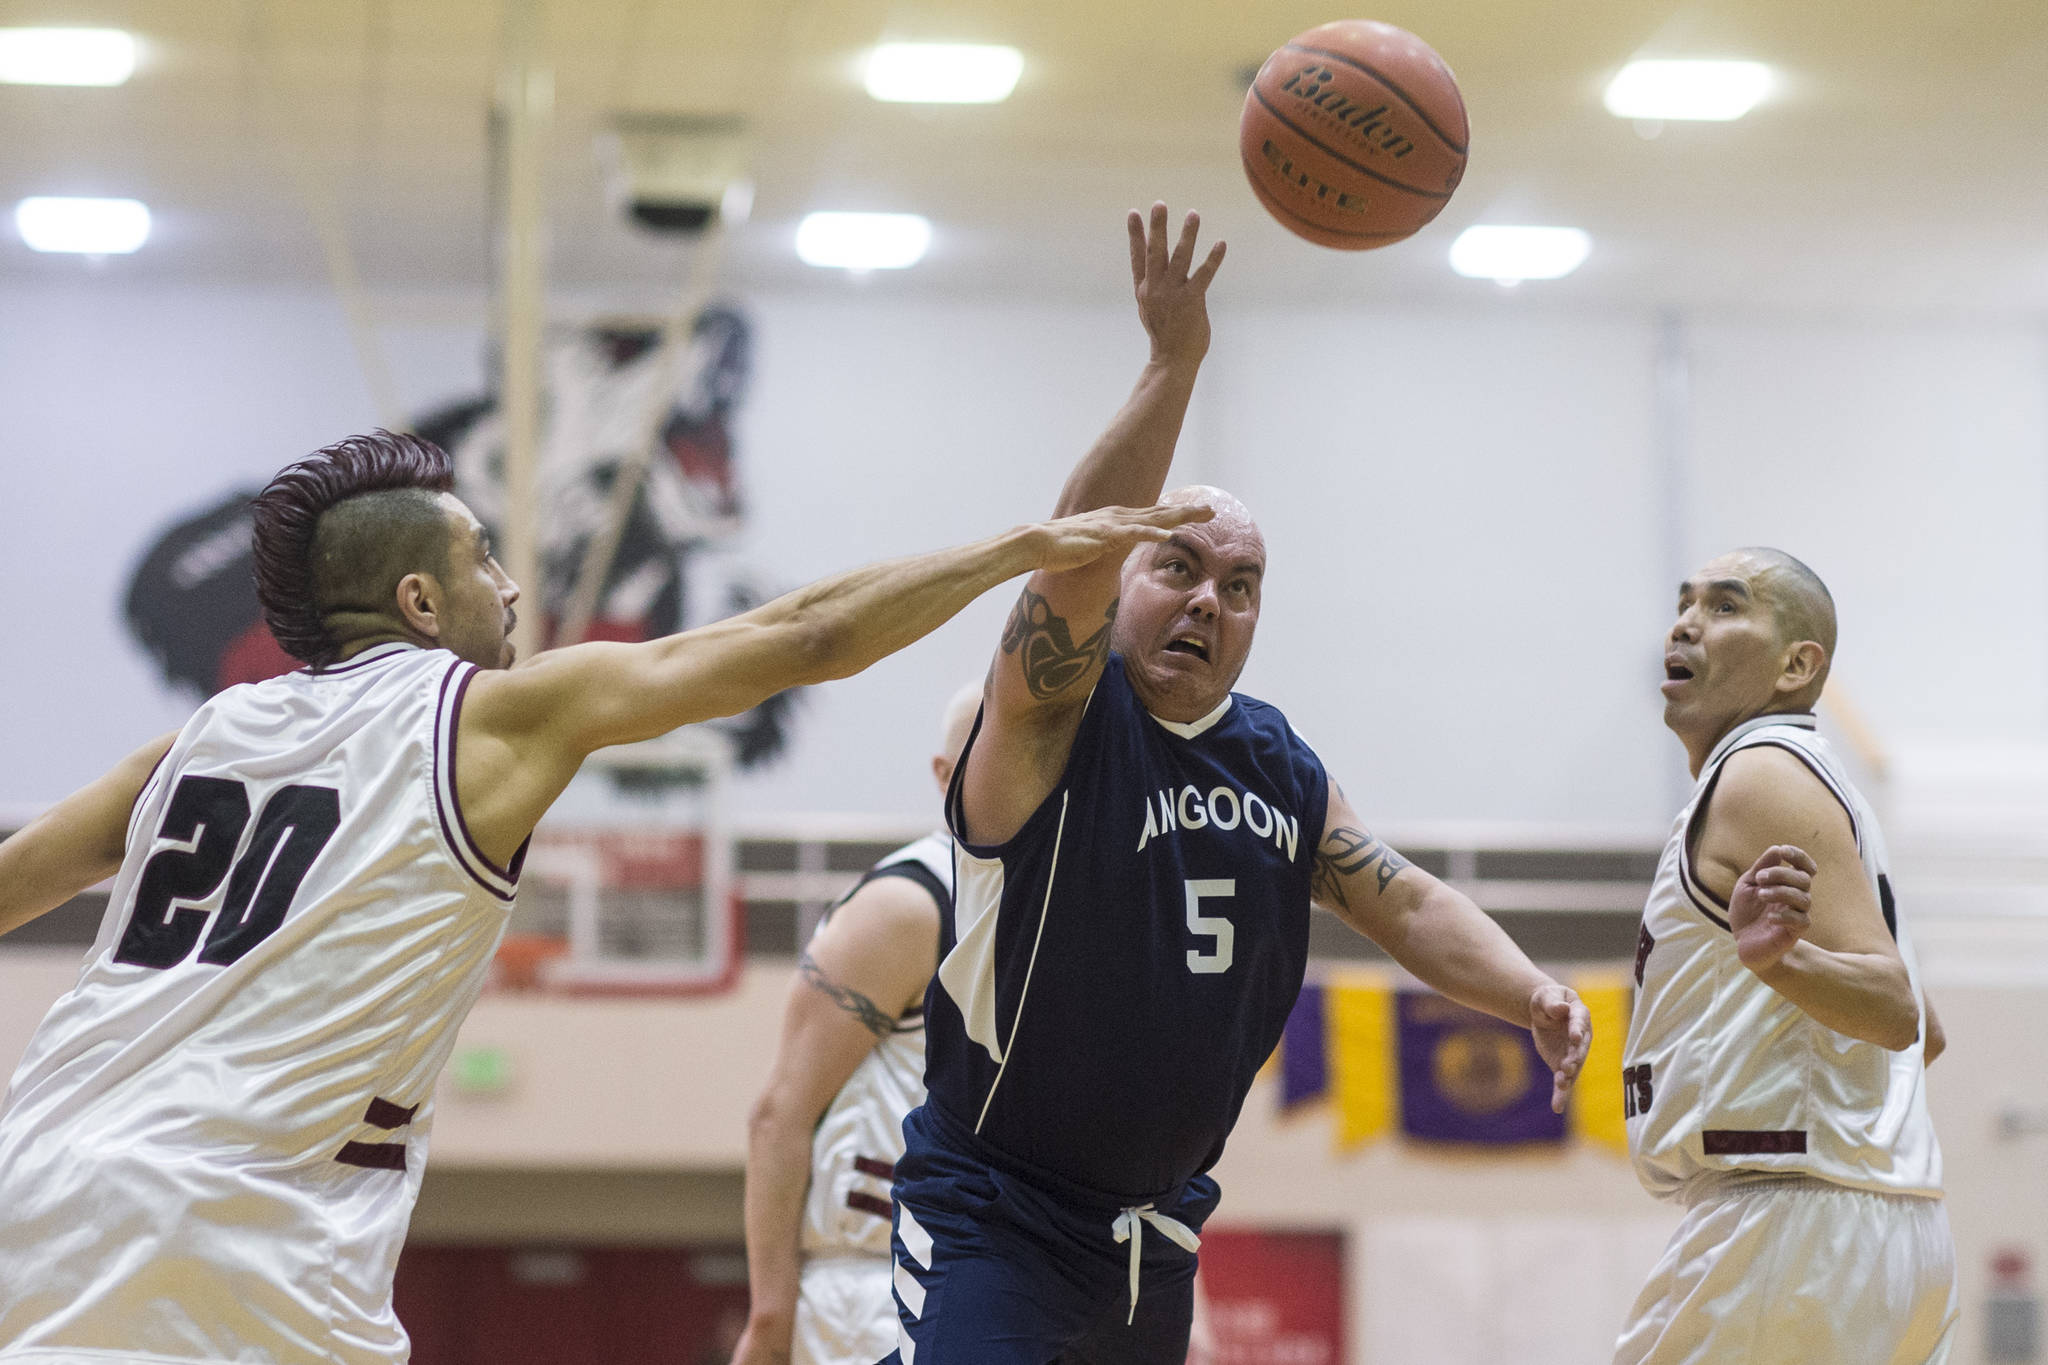 Angoon’s Paul Johnson, center, lays the ball up between Hoonah’s Marti Fred, left, and Louie White Sr. in a masters bracket game at the Juneau Lions Club 73rd Annual Gold Medal Basketball Tournament at Juneau-Douglas High School: Yadaa.at Kalé on Wednesday, March 20, 2019. Hoonah won 75-44. (Michael Penn | Juneau Empire)